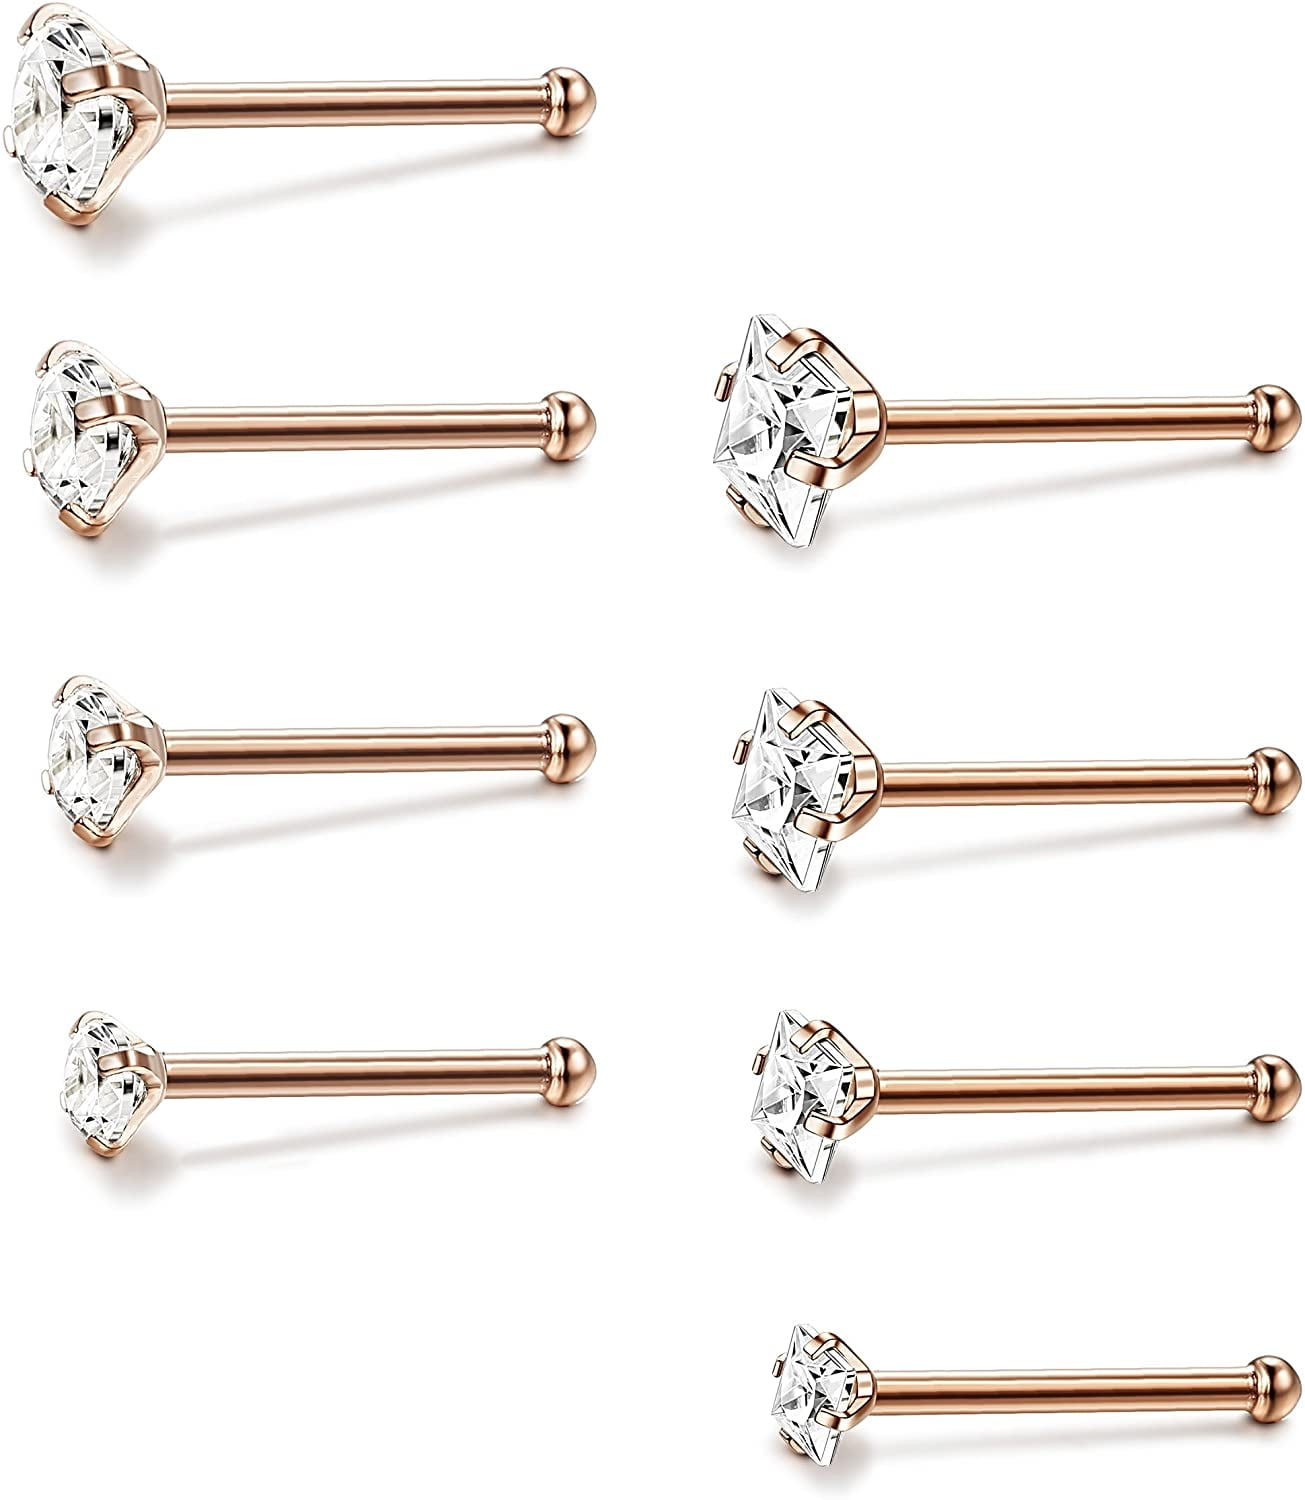 JOERICA 20 Pcs 20G Stainless Steel Nose Studs Rings Pin and L Bend Body Piercing CZ Inlay 